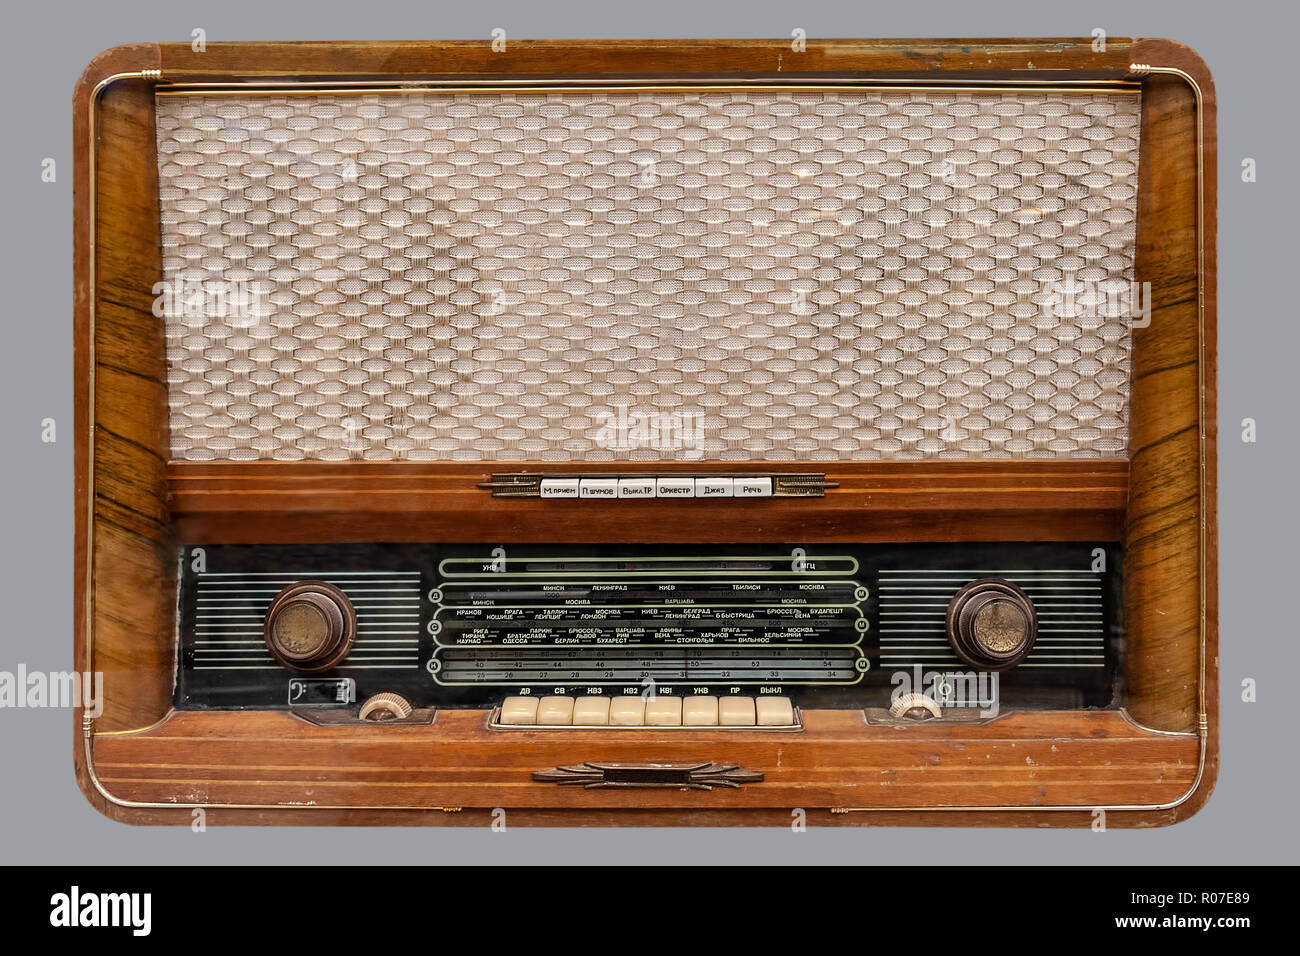 VINTAGE RUSSIAN TUBE RADIO. Old Russian tube tabletop radio in wooden case,  on isolated gray background with clipping path Stock Photo - Alamy